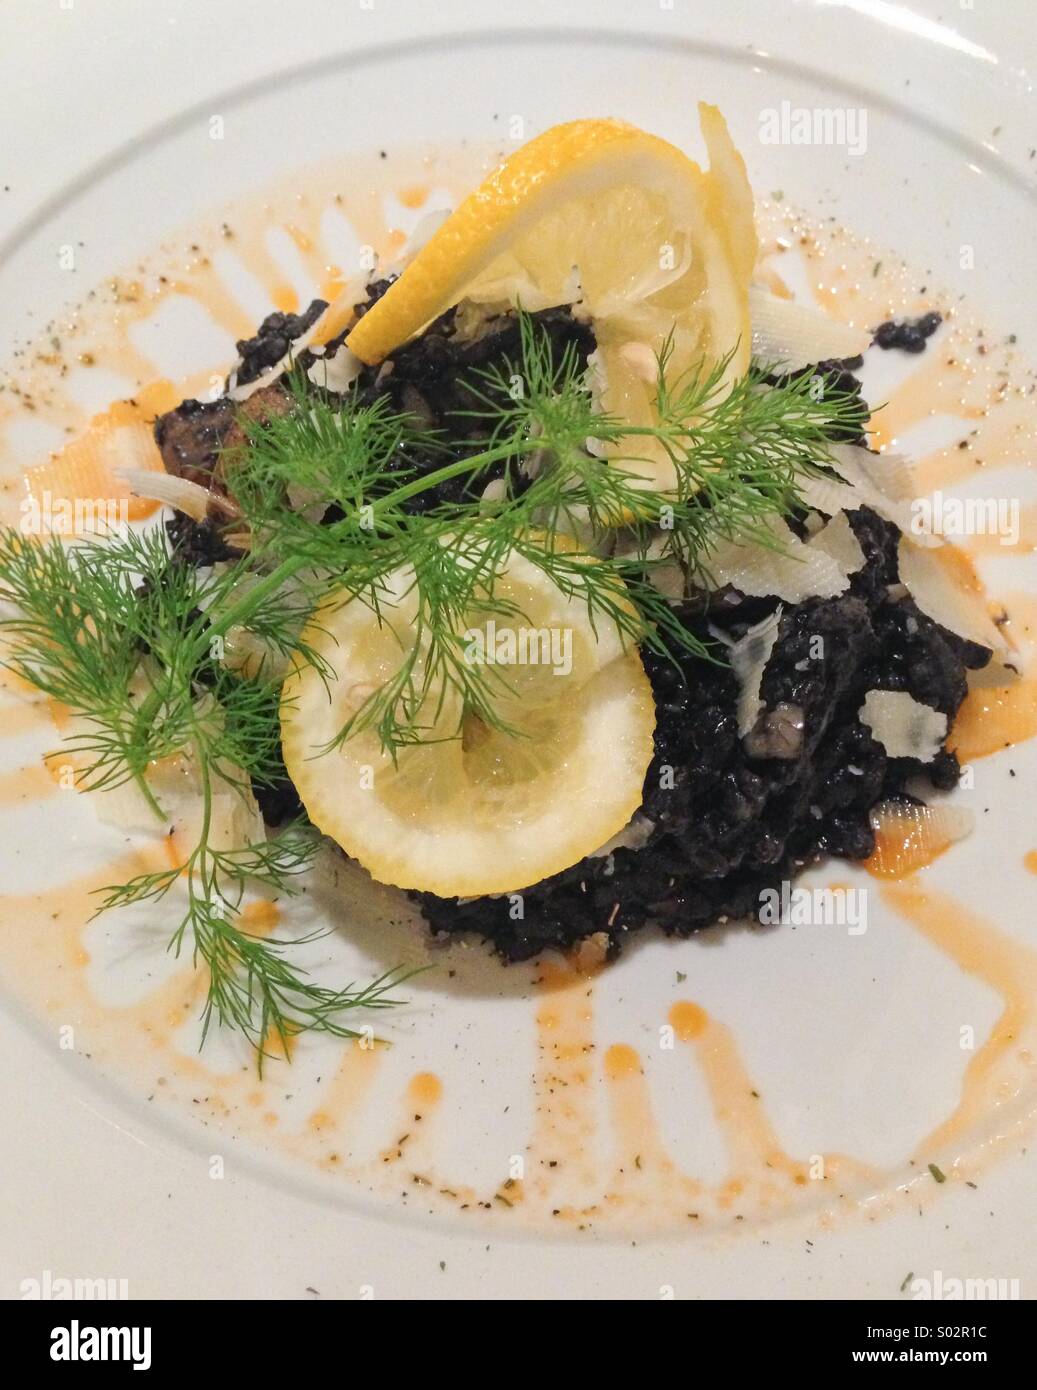 Black risotto with lemon and dill Stock Photo